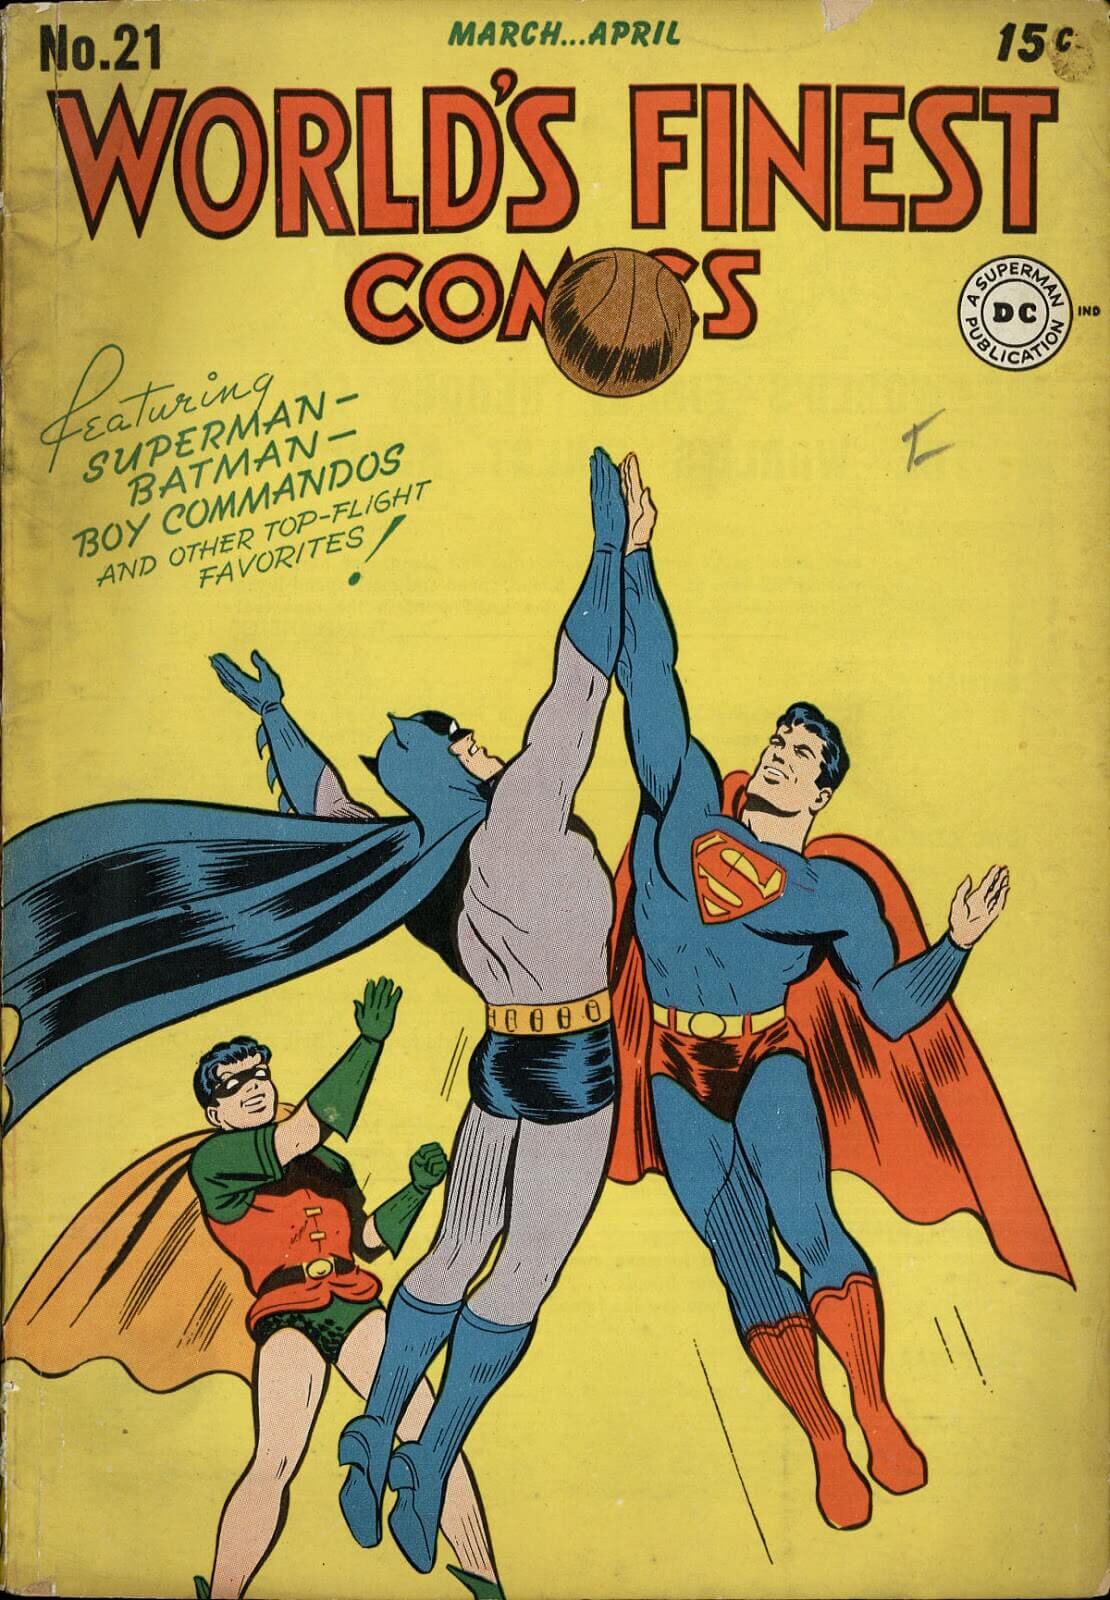 Batman and Superman used to play hoops together, for goodness sake!